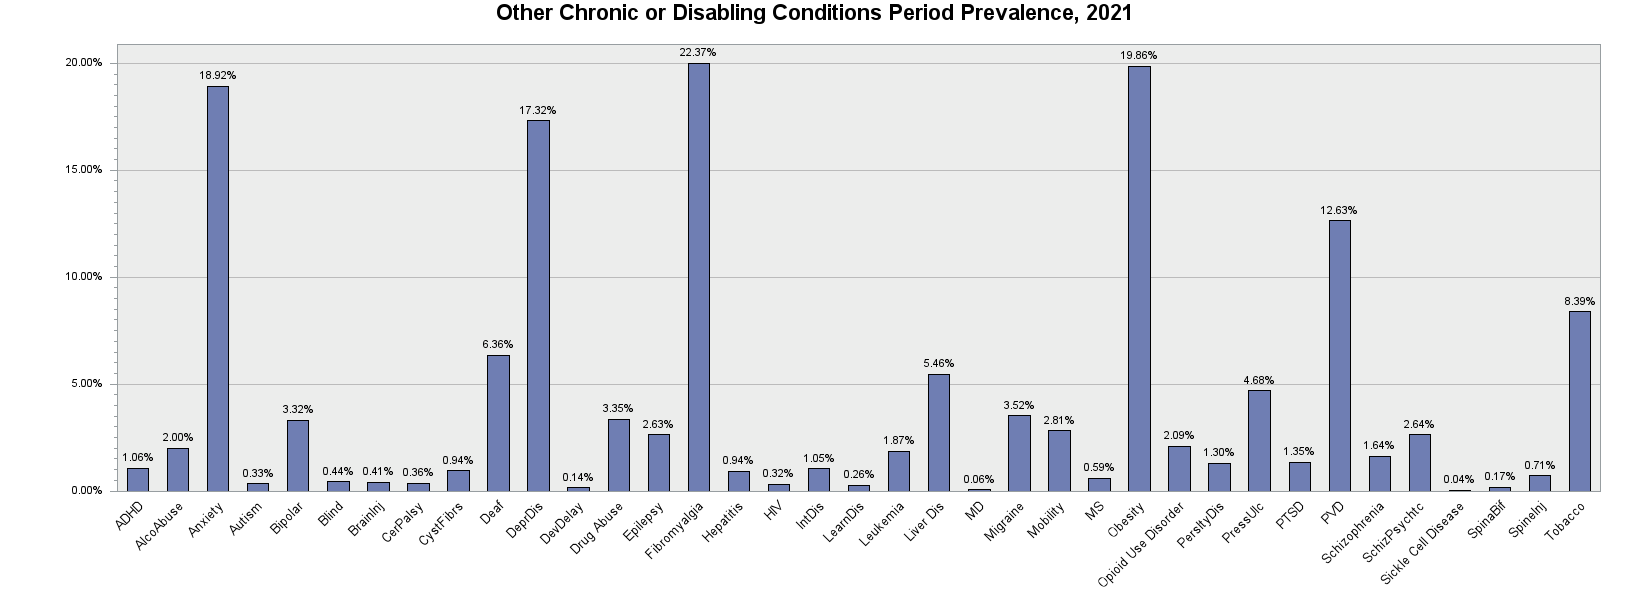 Chart for Other Chronic or Disabling Conditions Period Prevalence, 2020